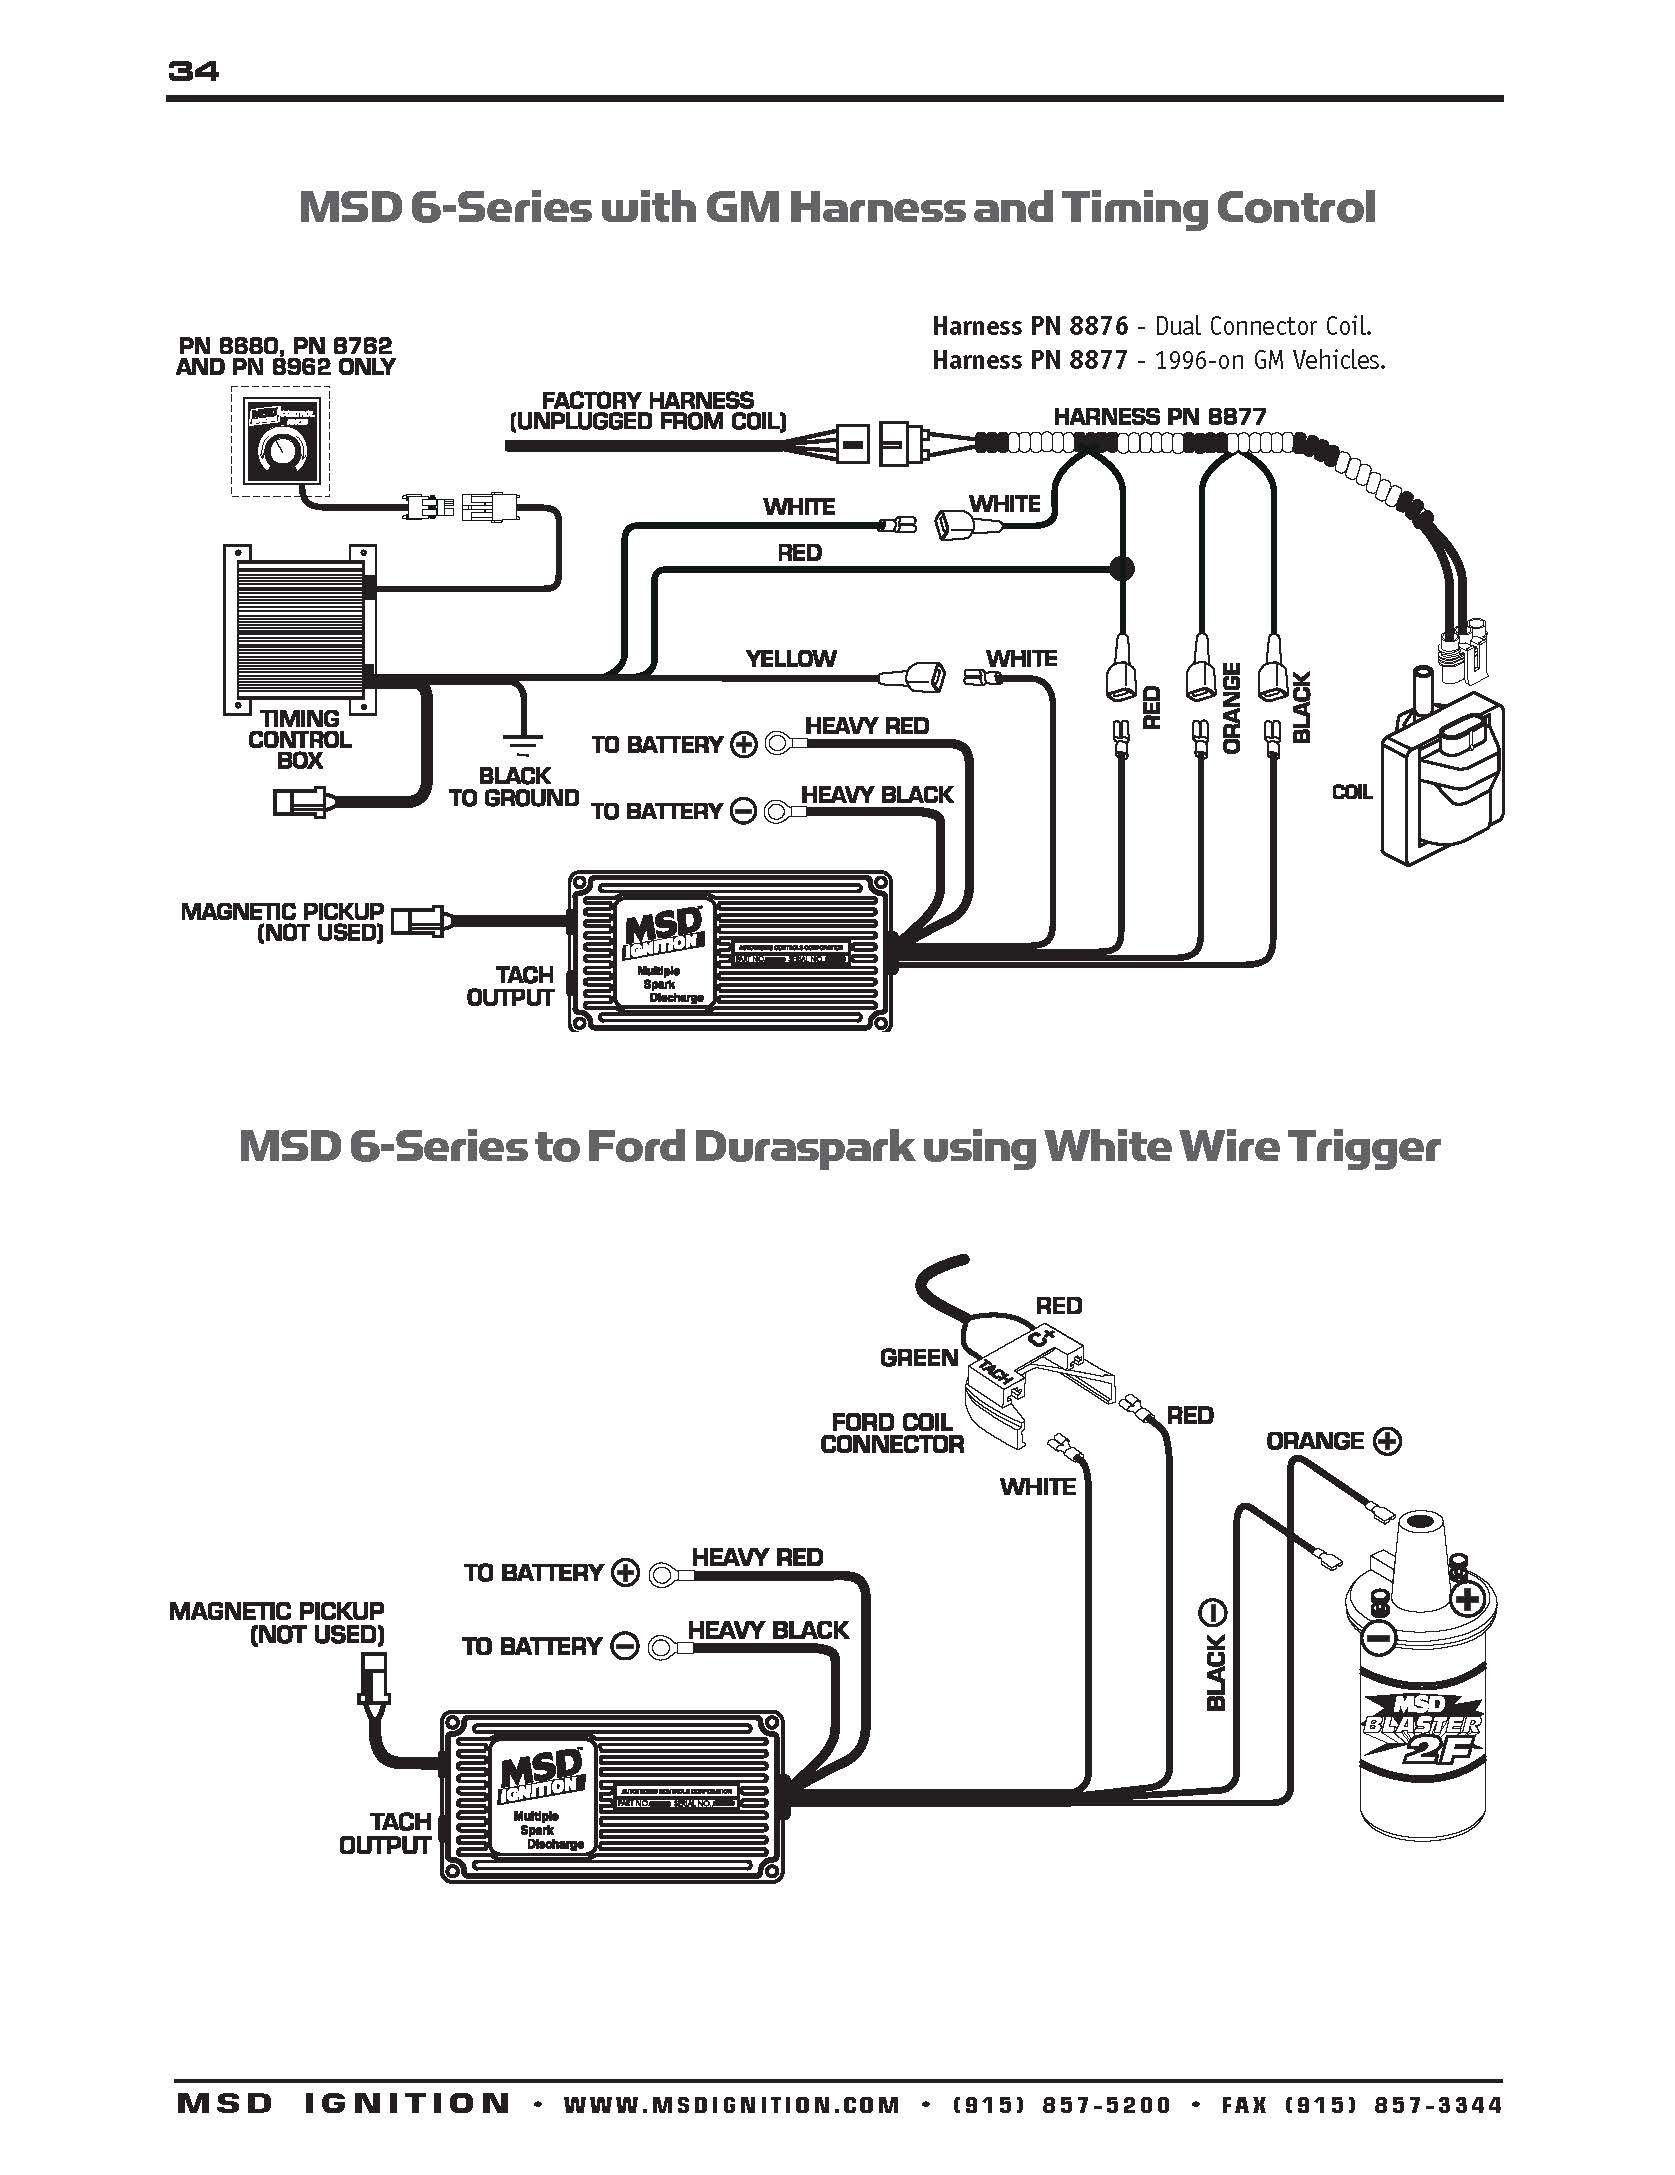 New Hei Distributor Wiring Diagram And Msd